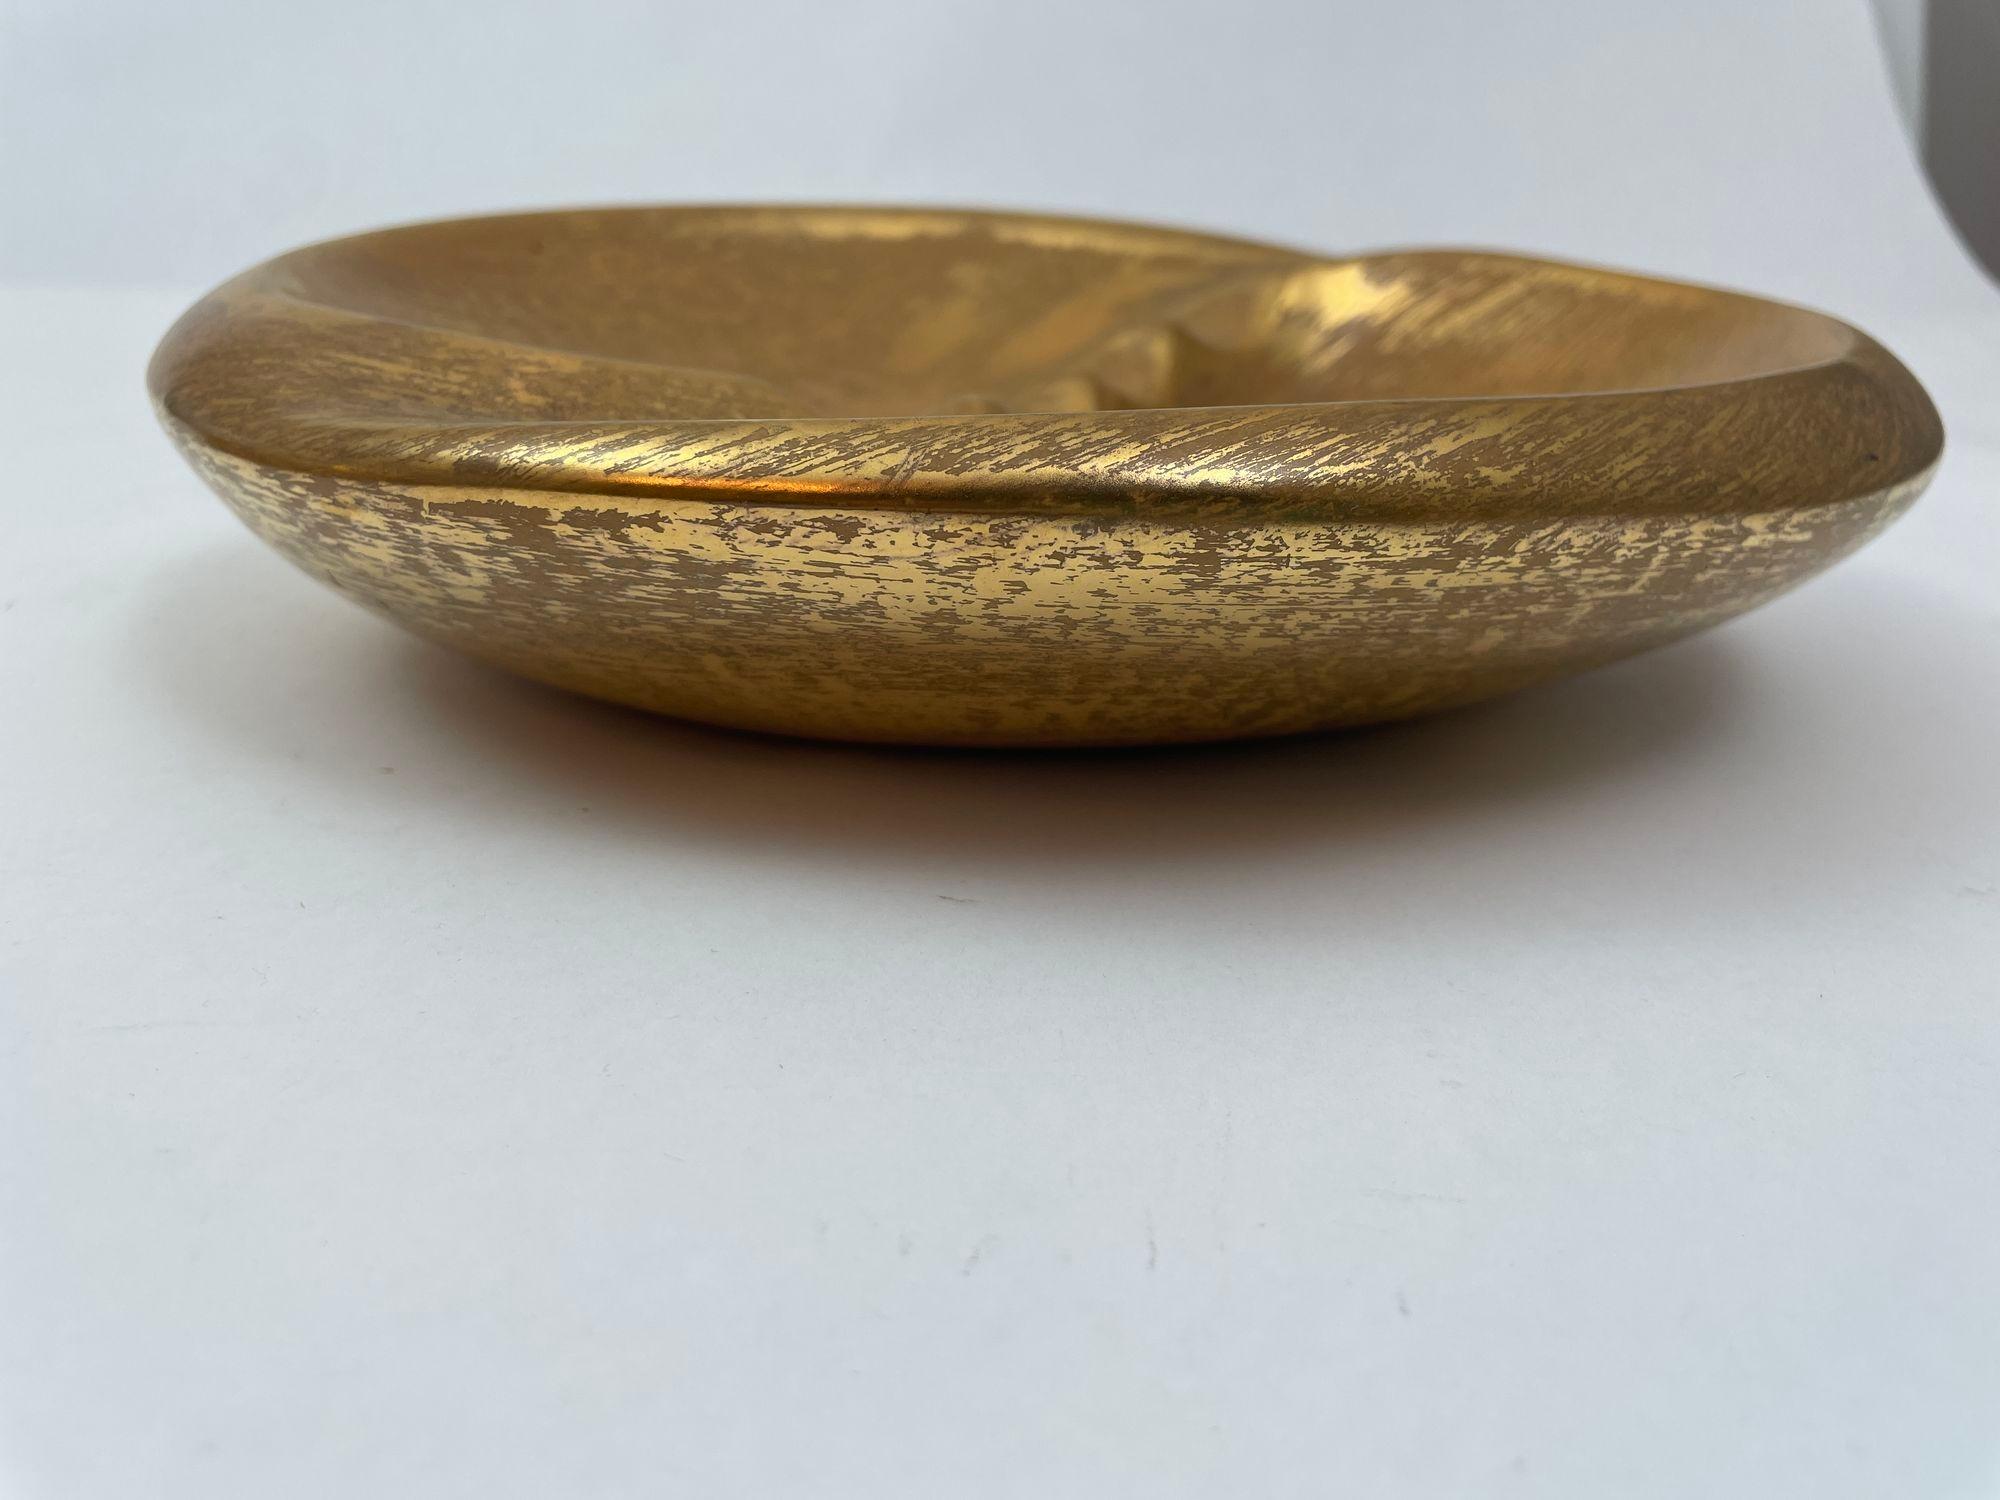 American Vintage Stangl Hand-Painted Gold Oval Ashtray Dish Catchall 1960s